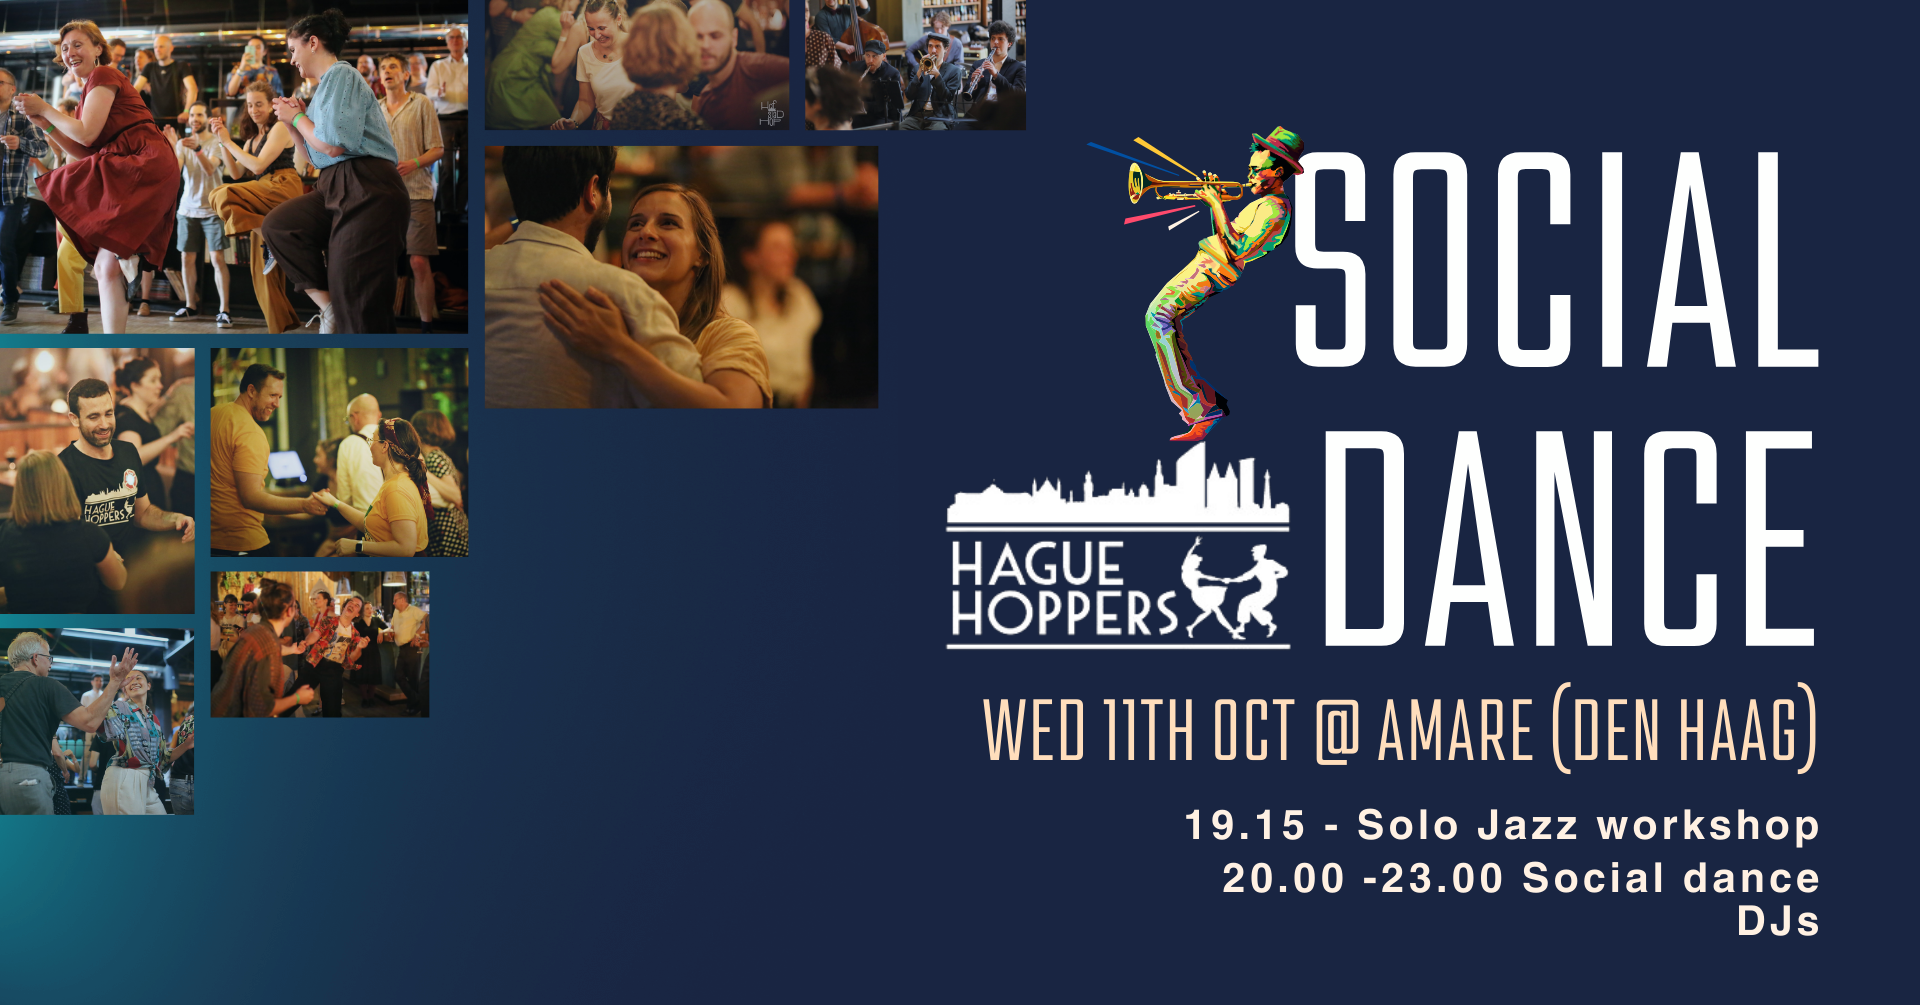 Social swing dance with Hague Hoppers @Amare